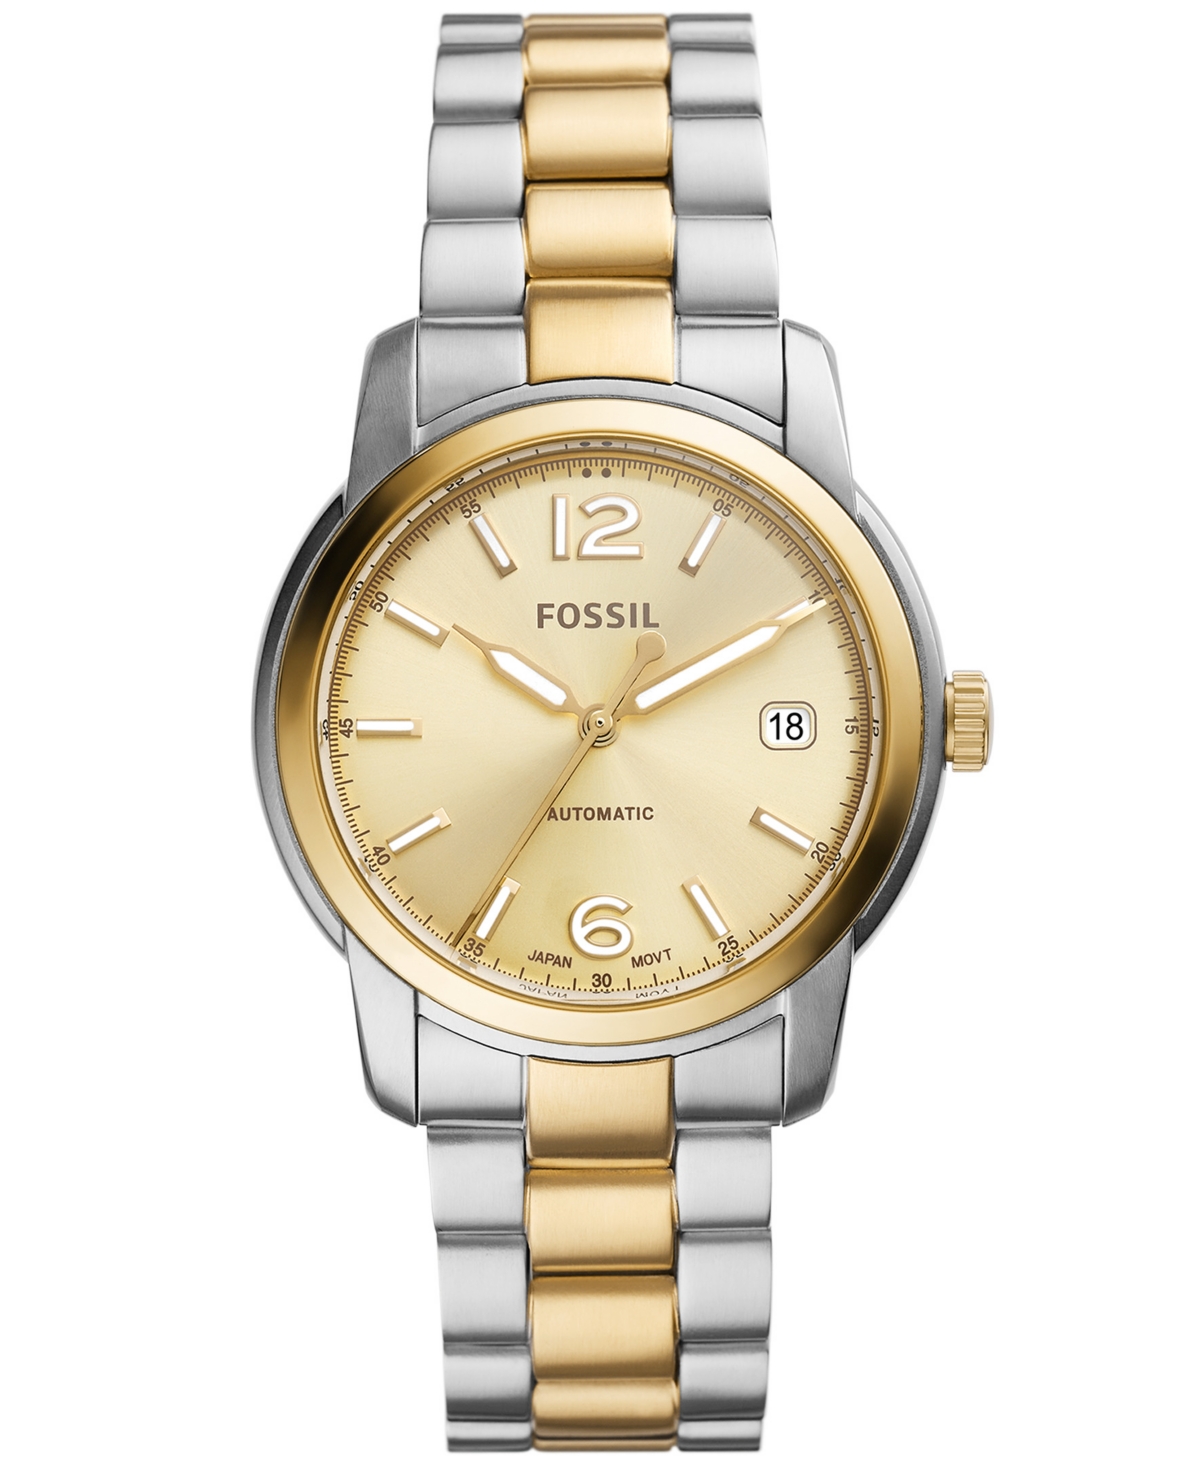 Fossil Women's Heritage Automatic Two Tone Stainless Steel Watch 38mm